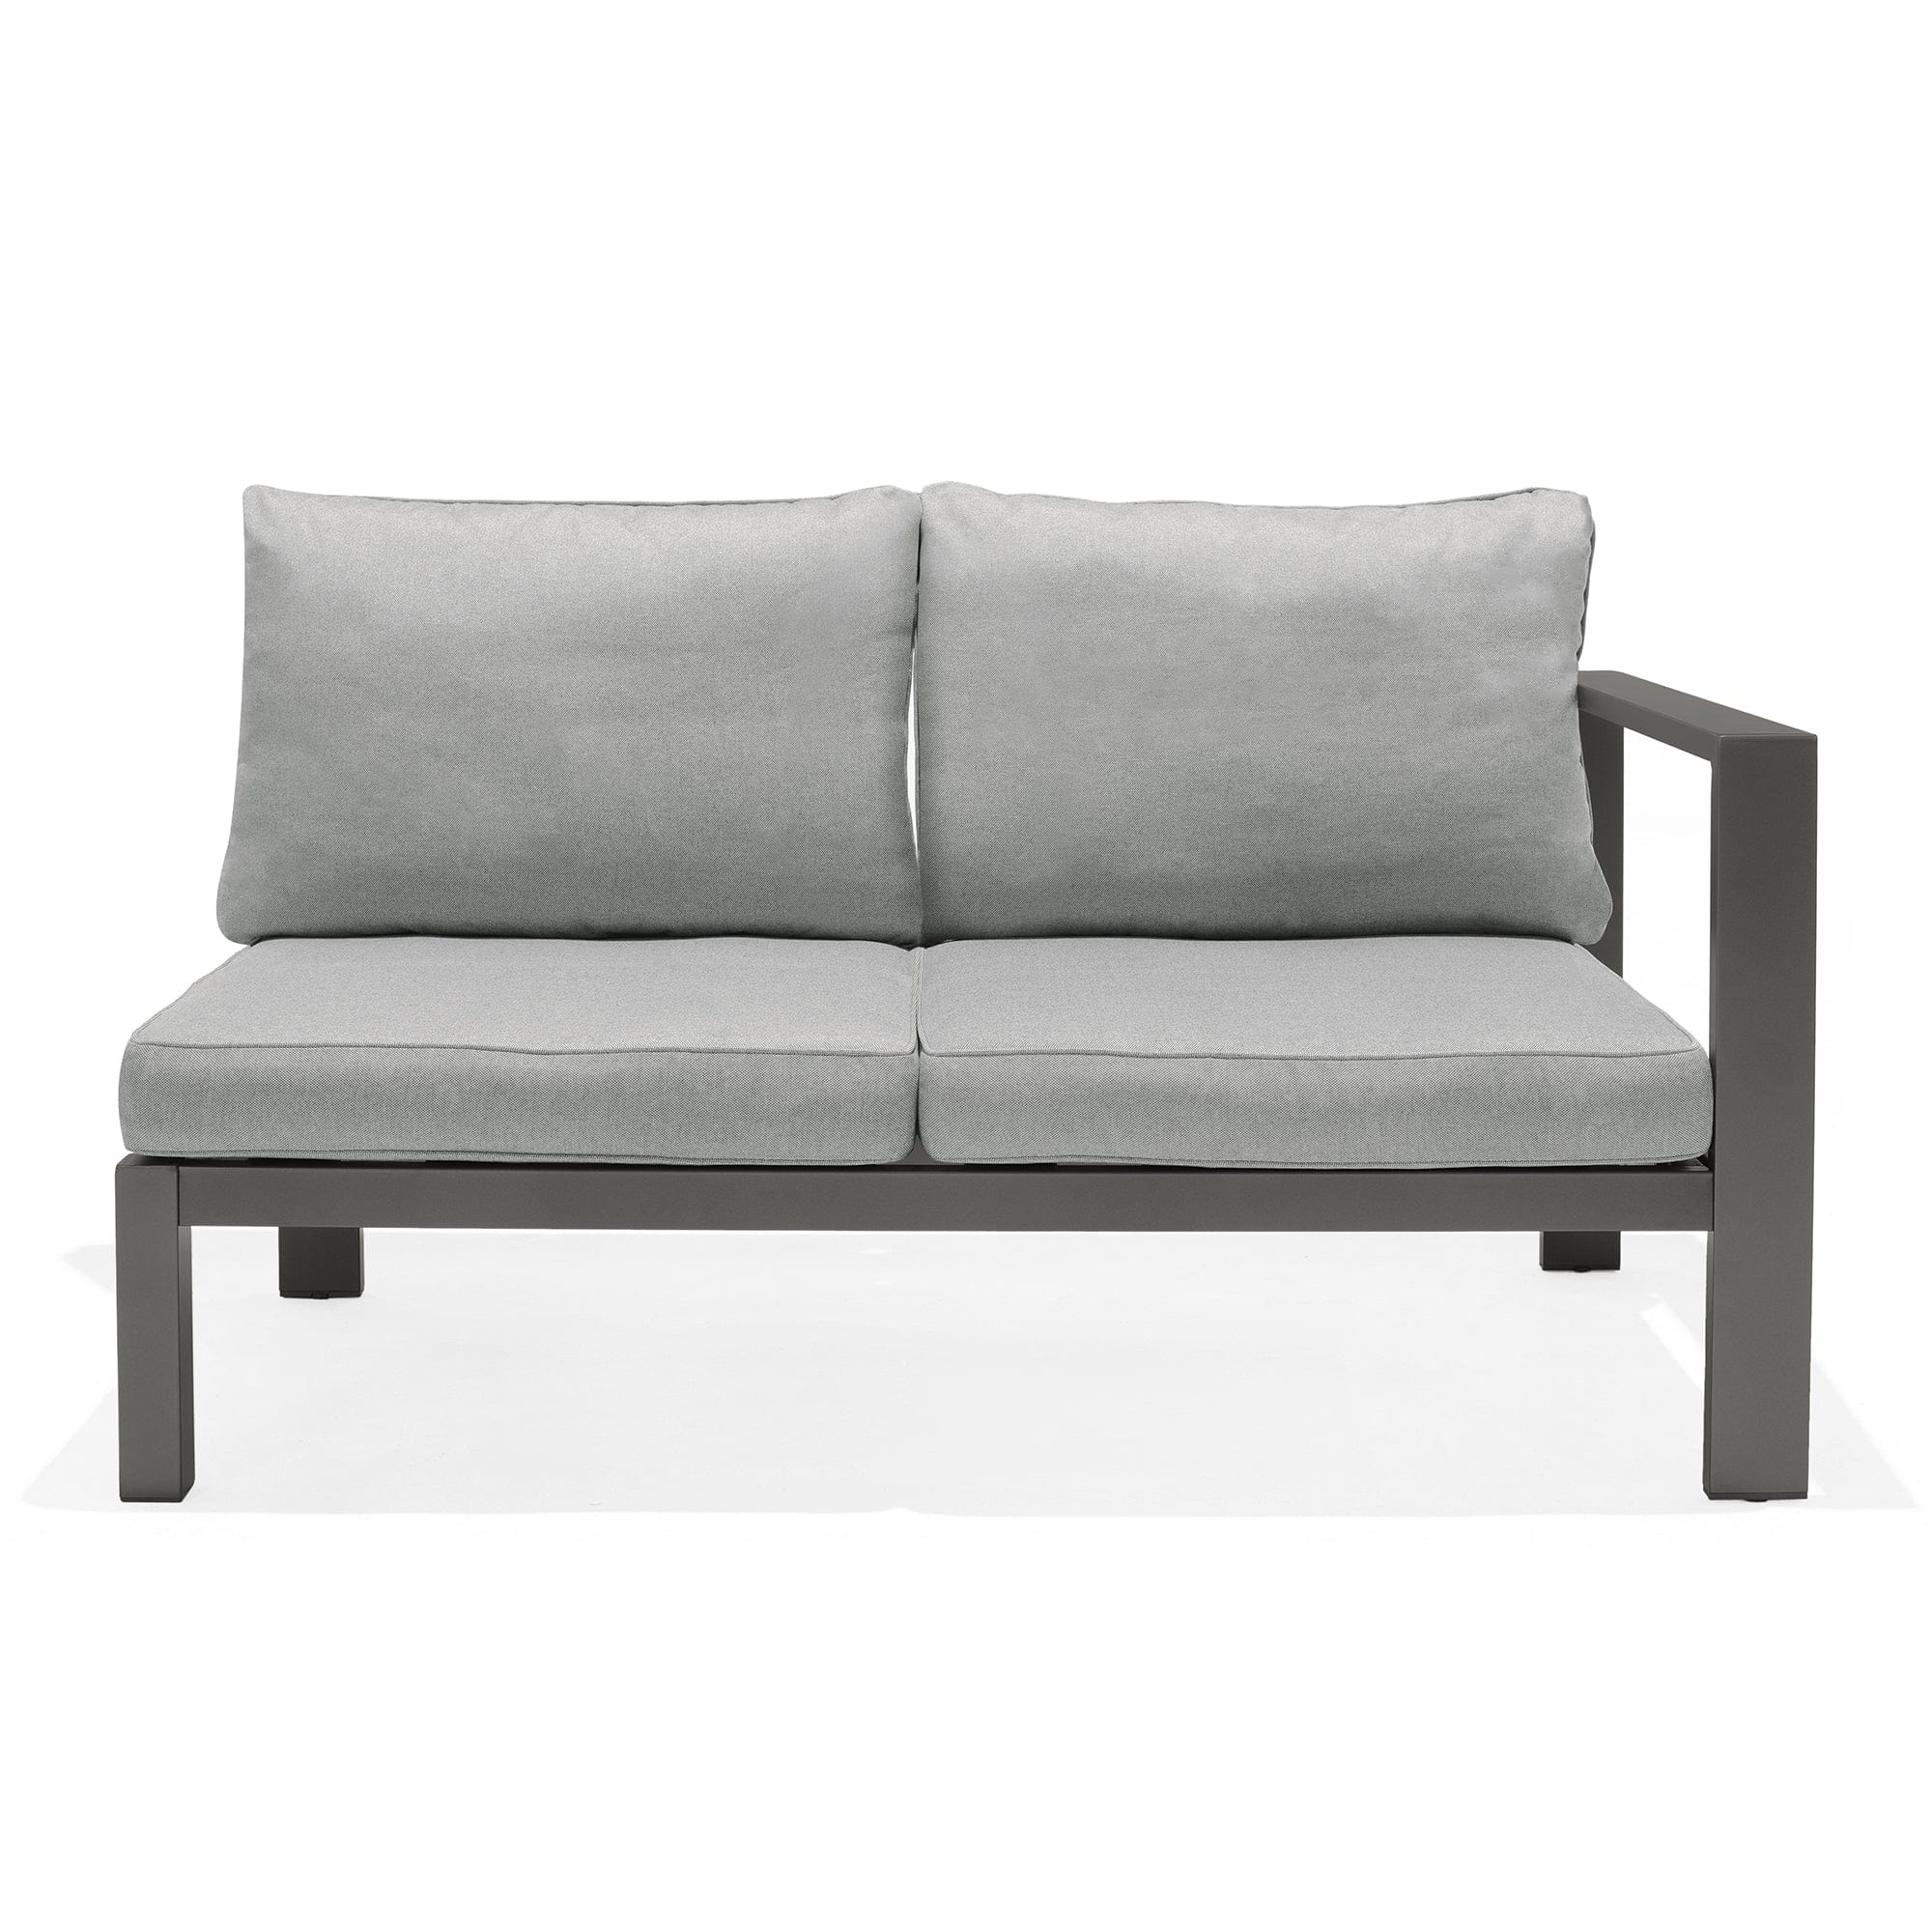 Armen Living Outdoor Set Armen Living | Solana Outdoor Sectional Set in Cosmos Finish with Grey Cushions and Coffee Table | SETODSLSE